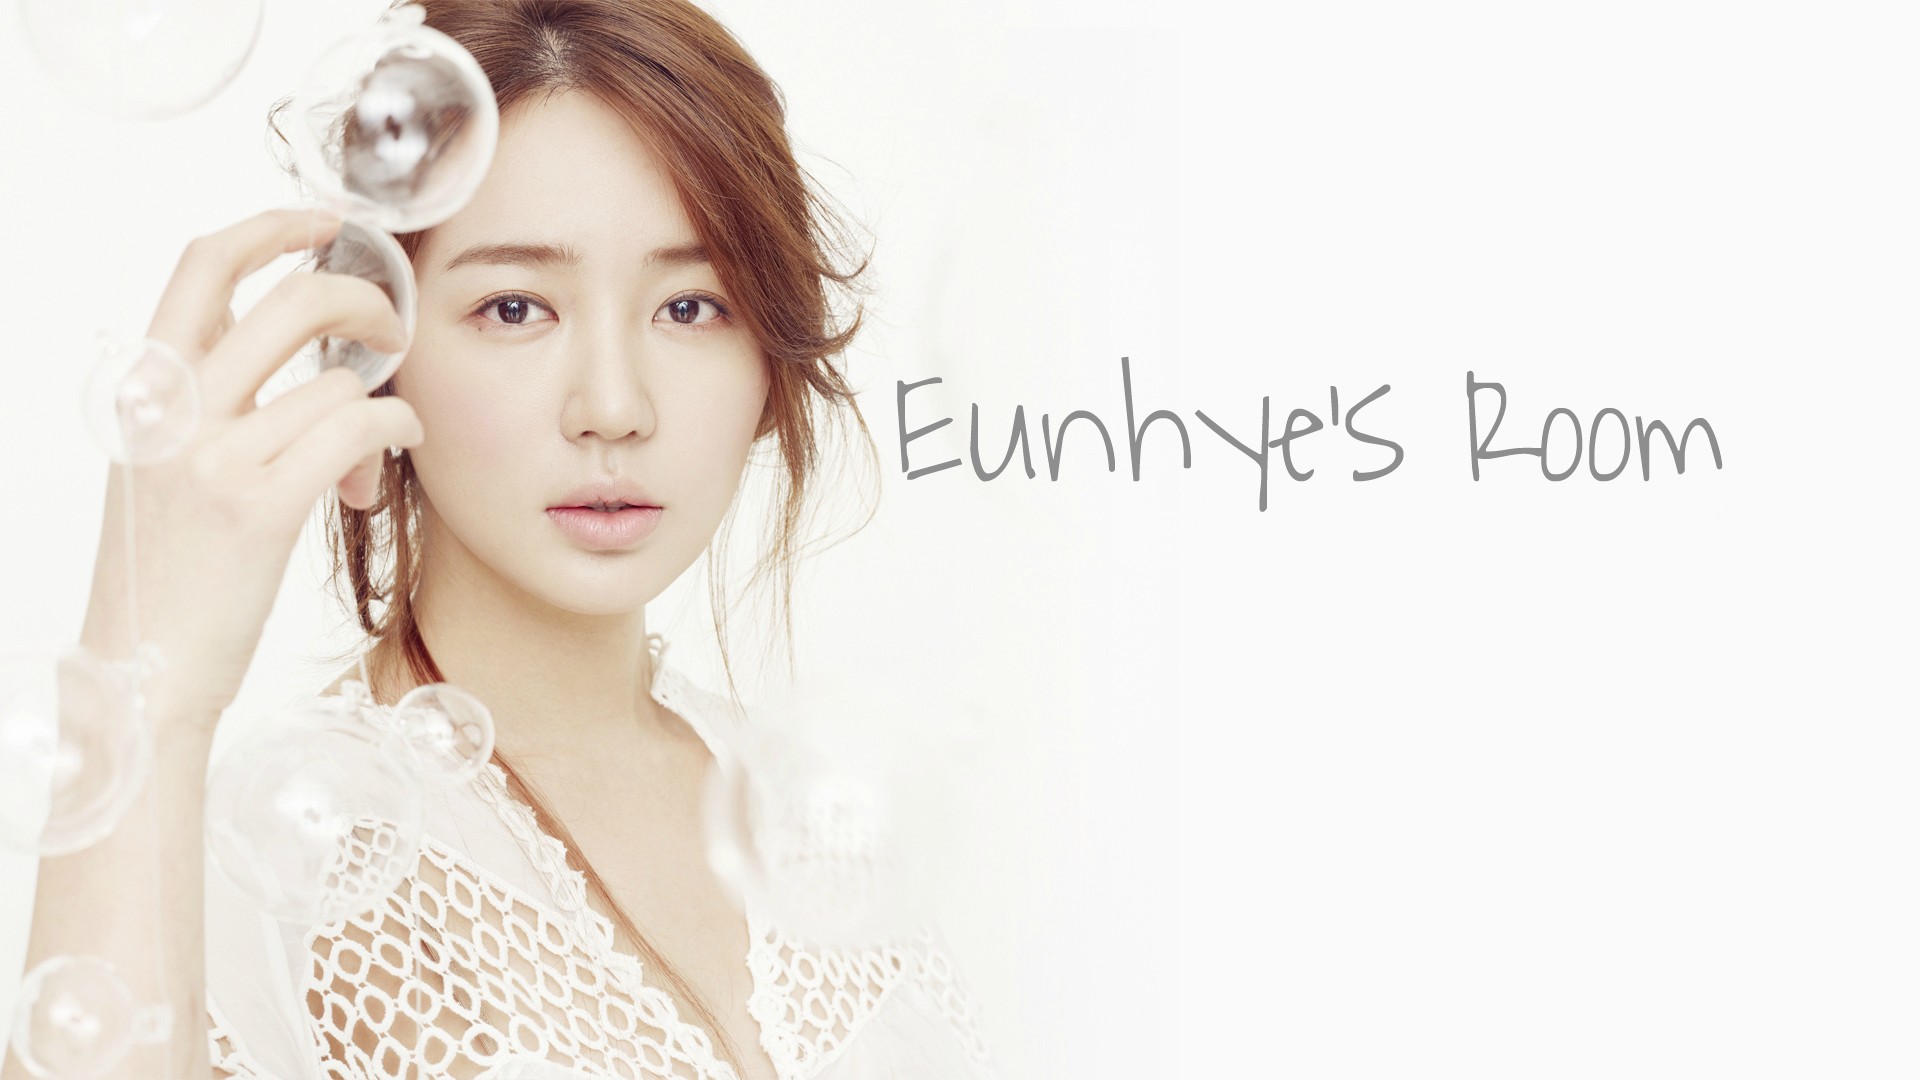 Yoon Eun Hye Before And After - HD Wallpaper 